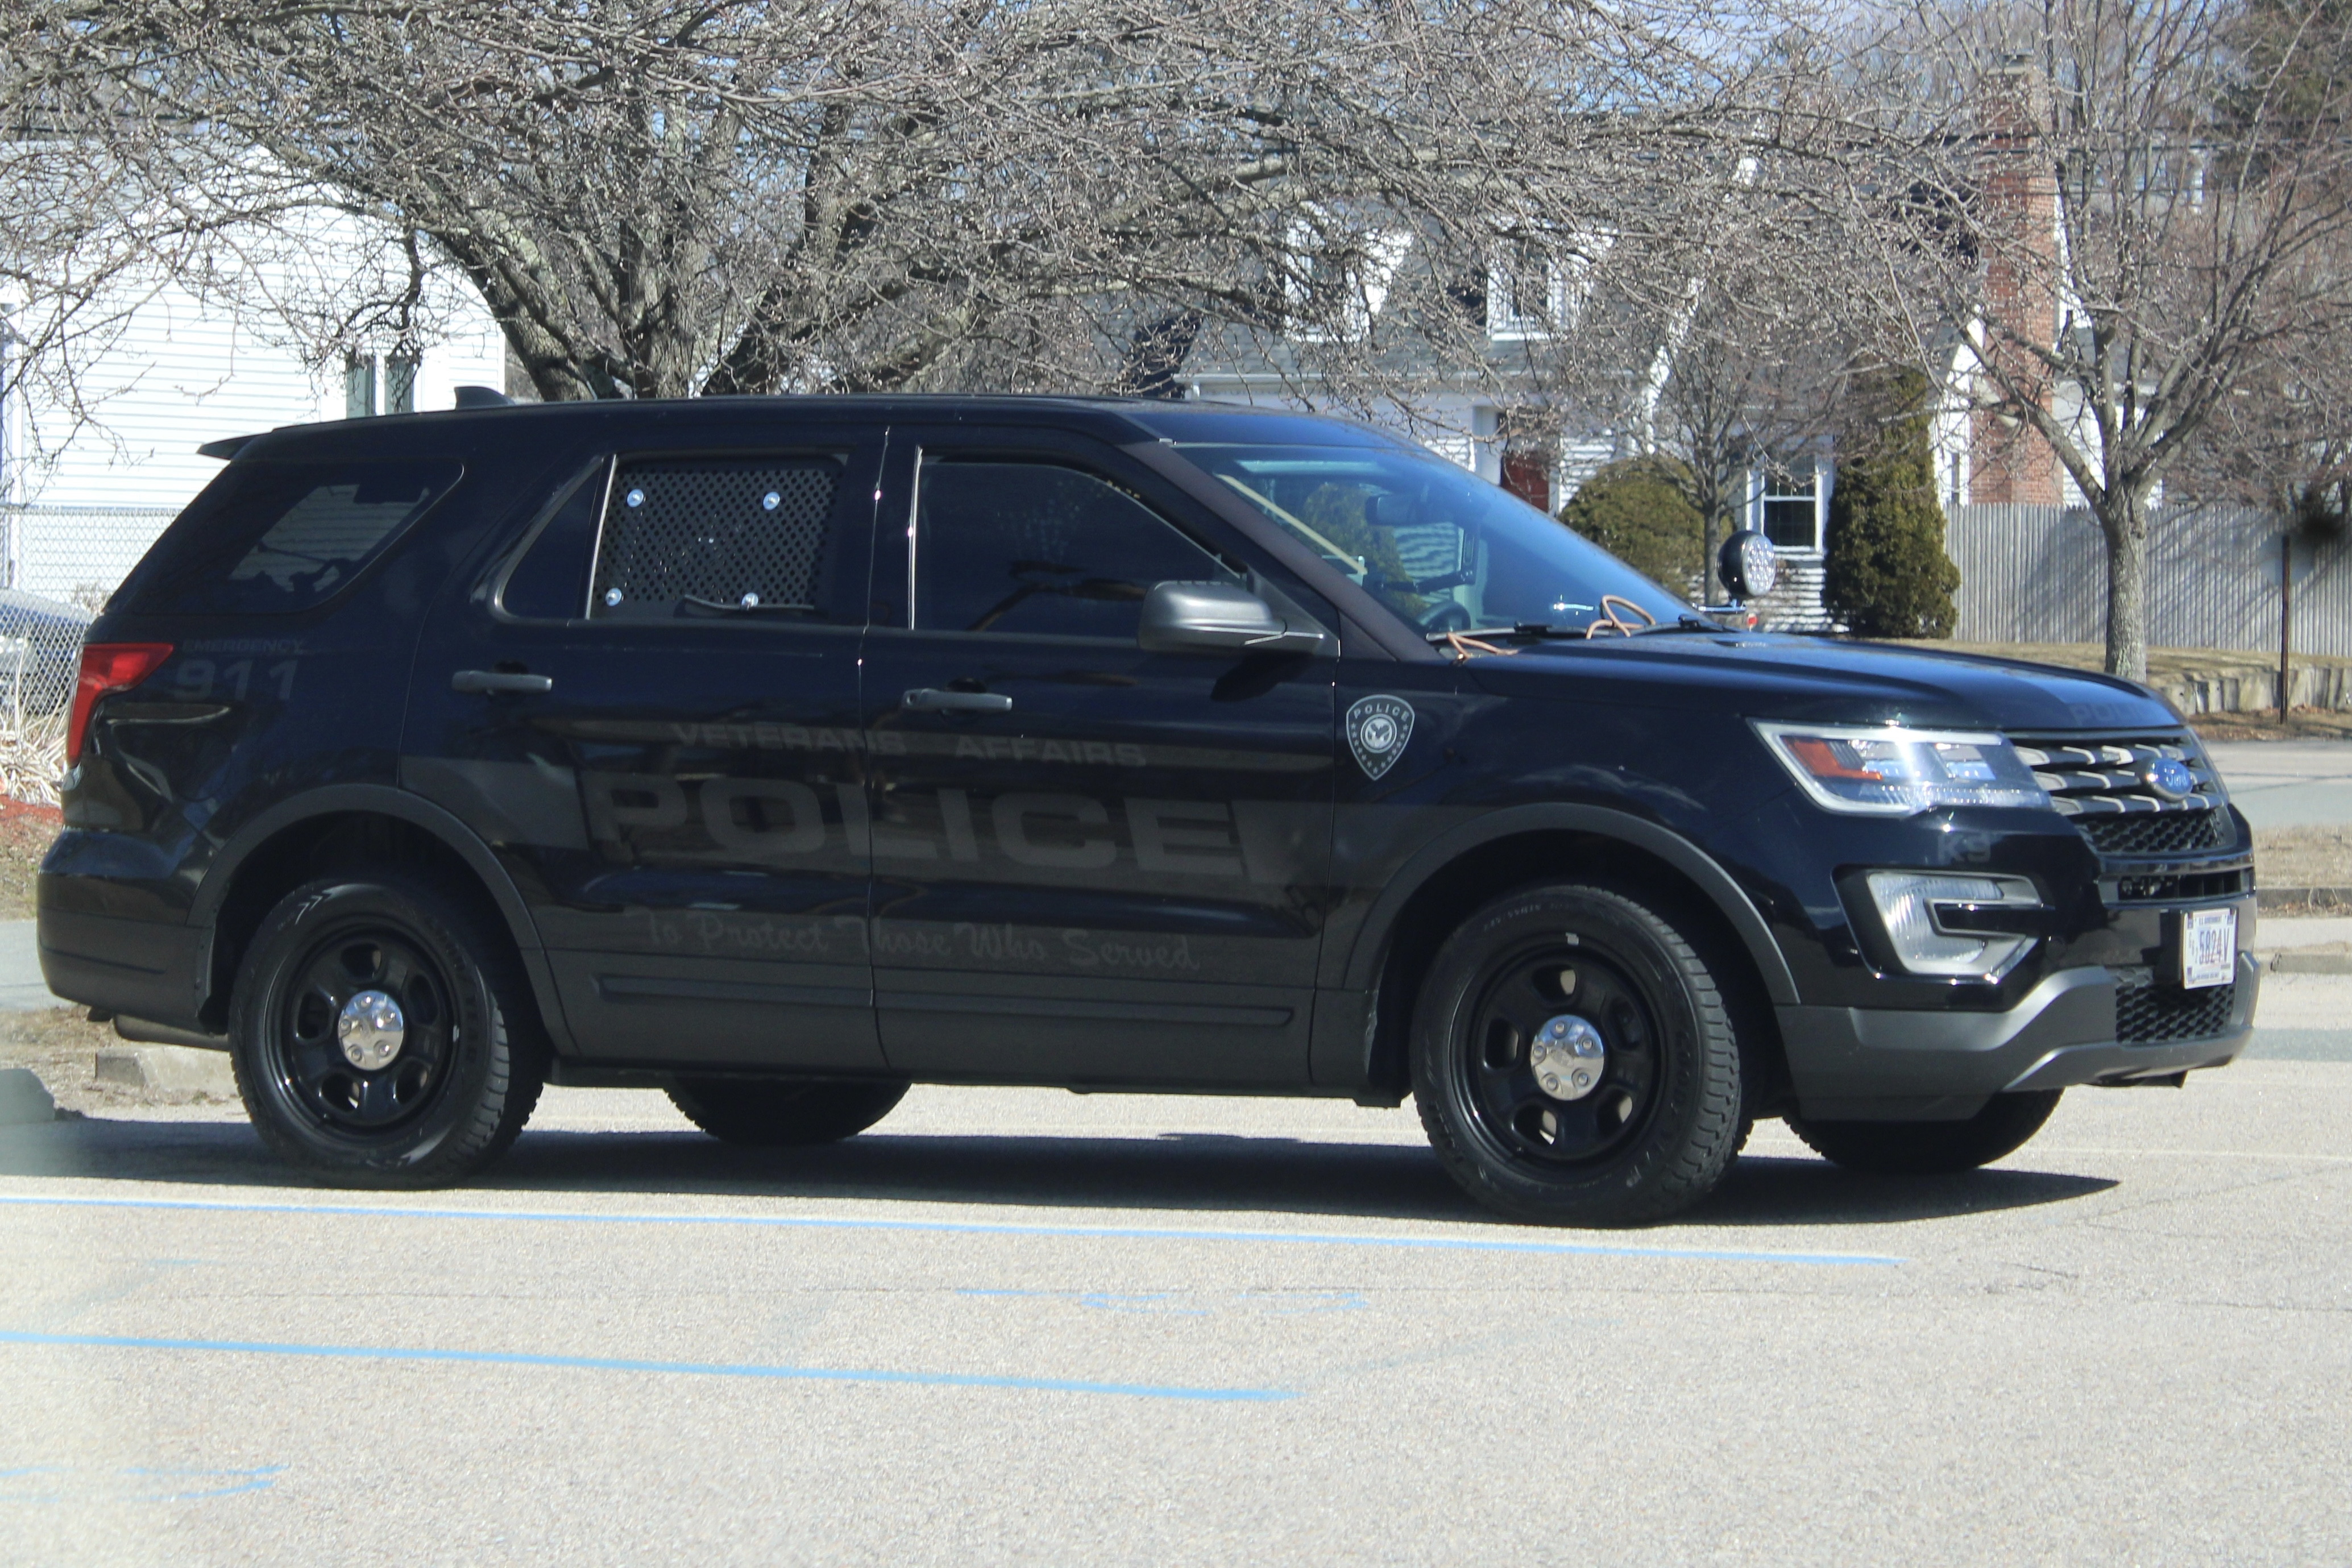 A photo  of Department of Veterans Affairs Police
            K-9 Unit, a 2016-2019 Ford Police Interceptor Utility             taken by @riemergencyvehicles